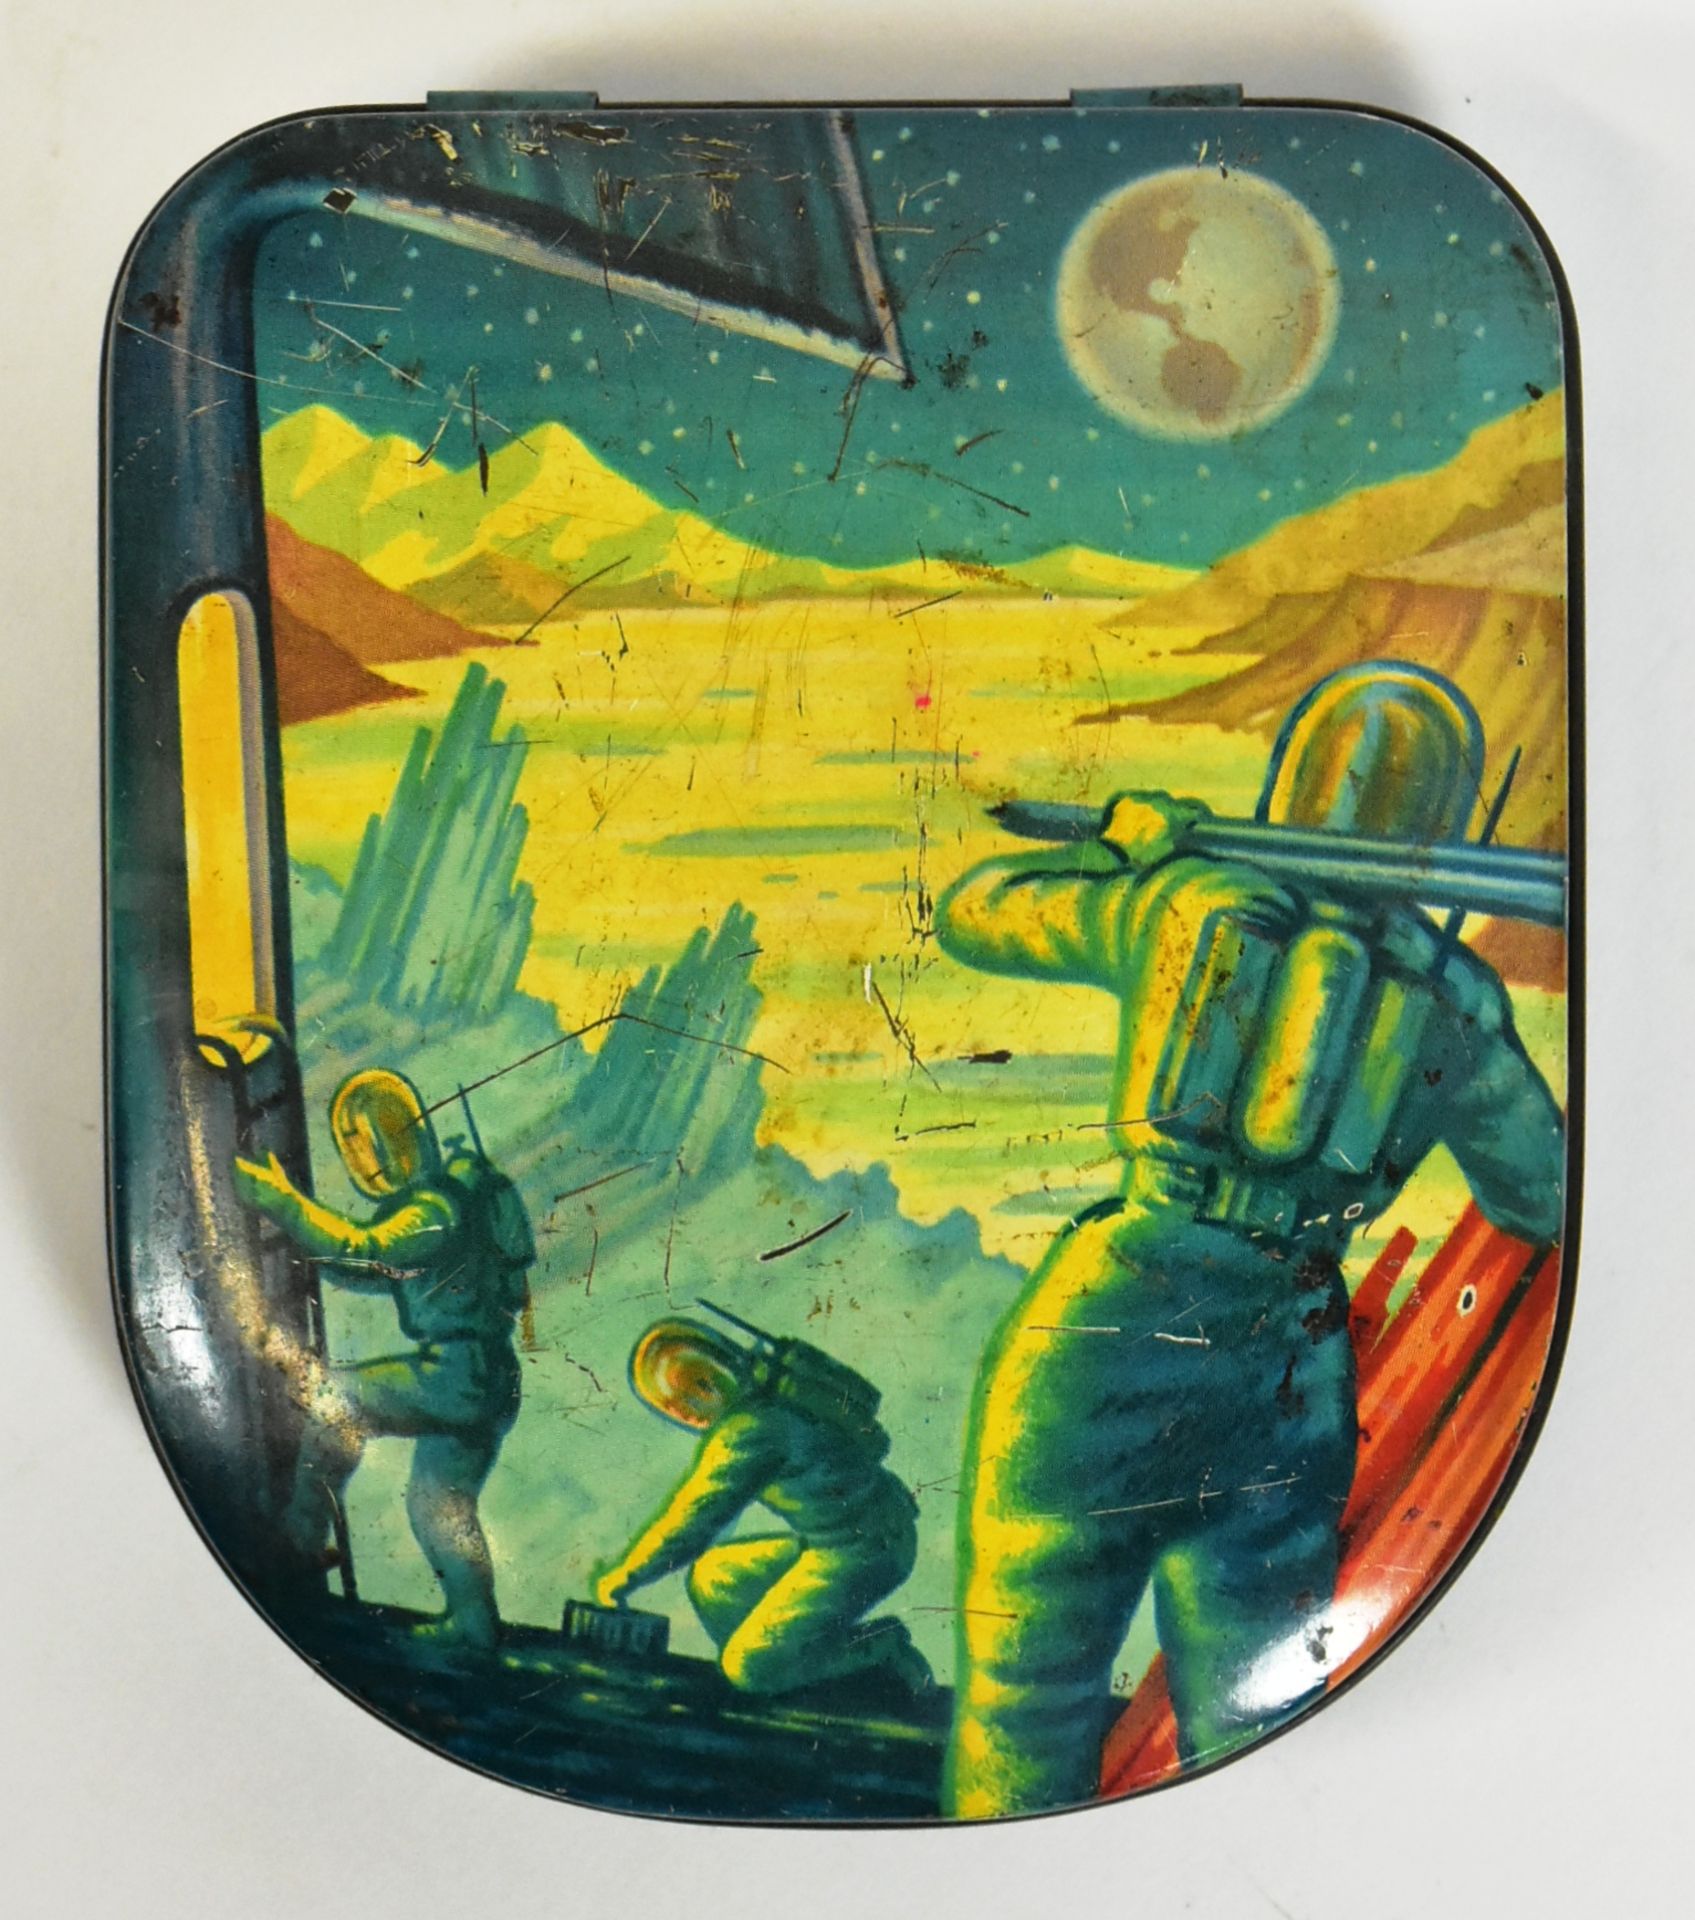 1950S SPACE SCIENCE FICTION - EDWARD SHARP & SONS TINS - Image 2 of 6